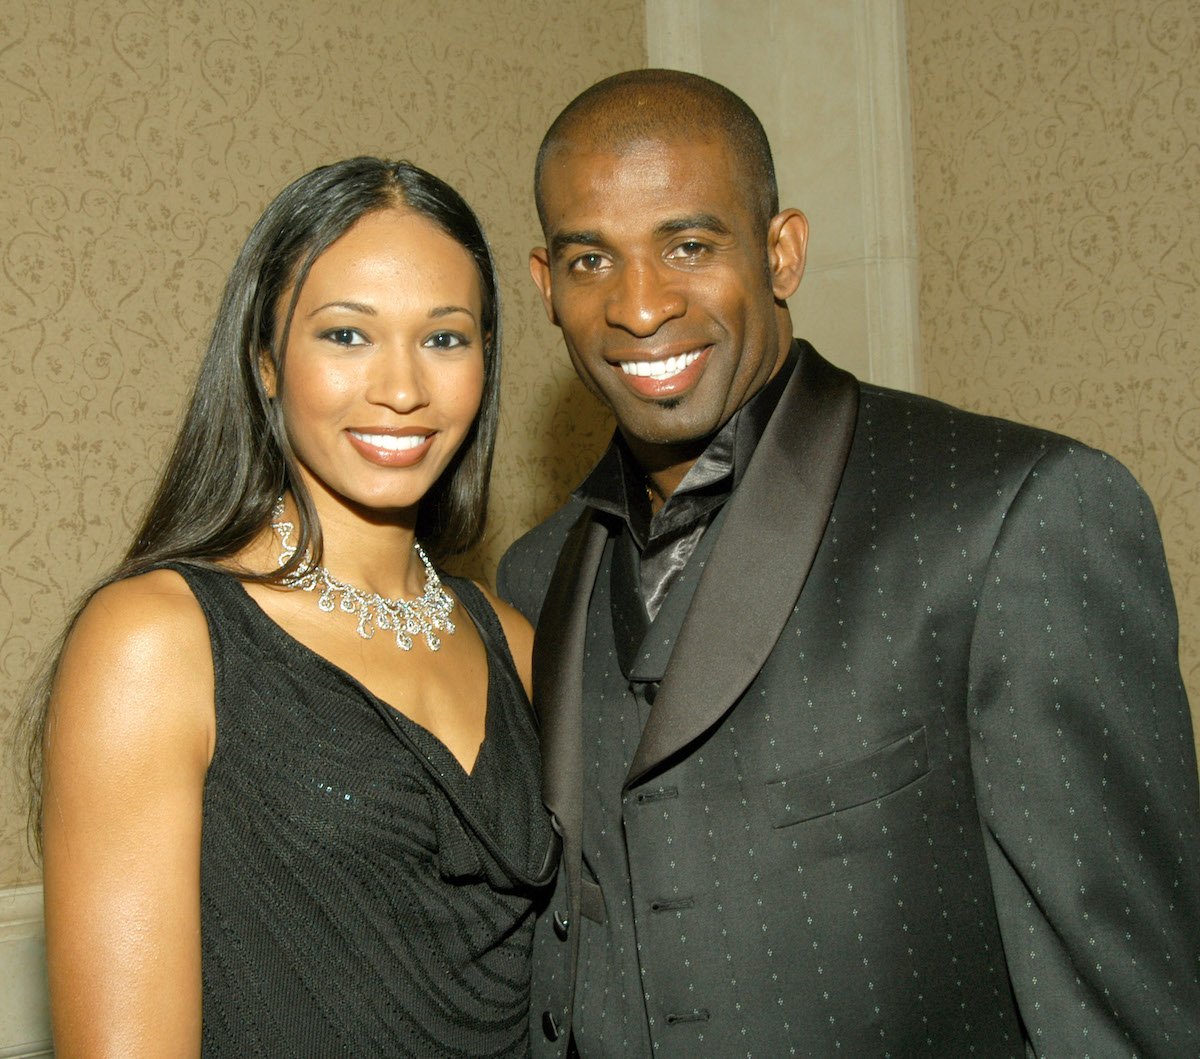 Deion Sanders Drove His Car Off a Cliff and Survived During His Divorce